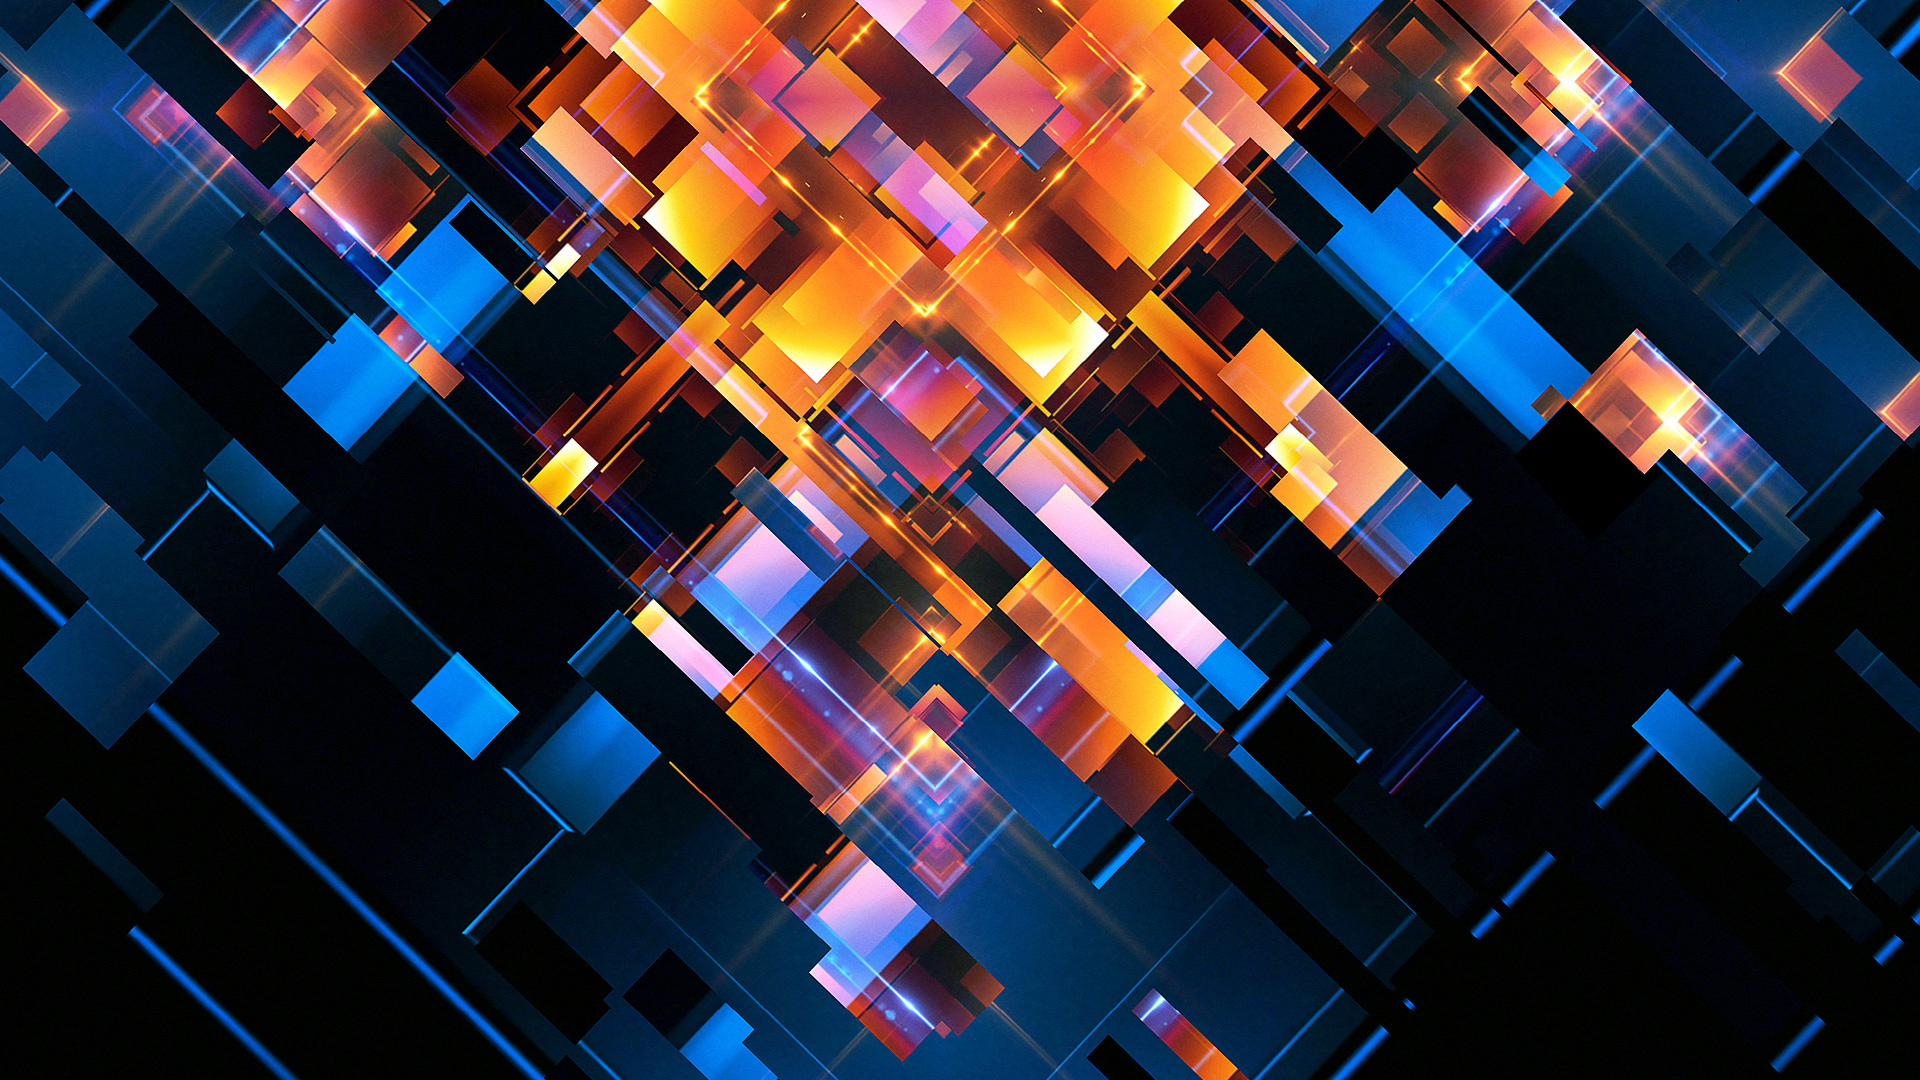 ASUS Abstract Colorful Digital Art 1920x1080